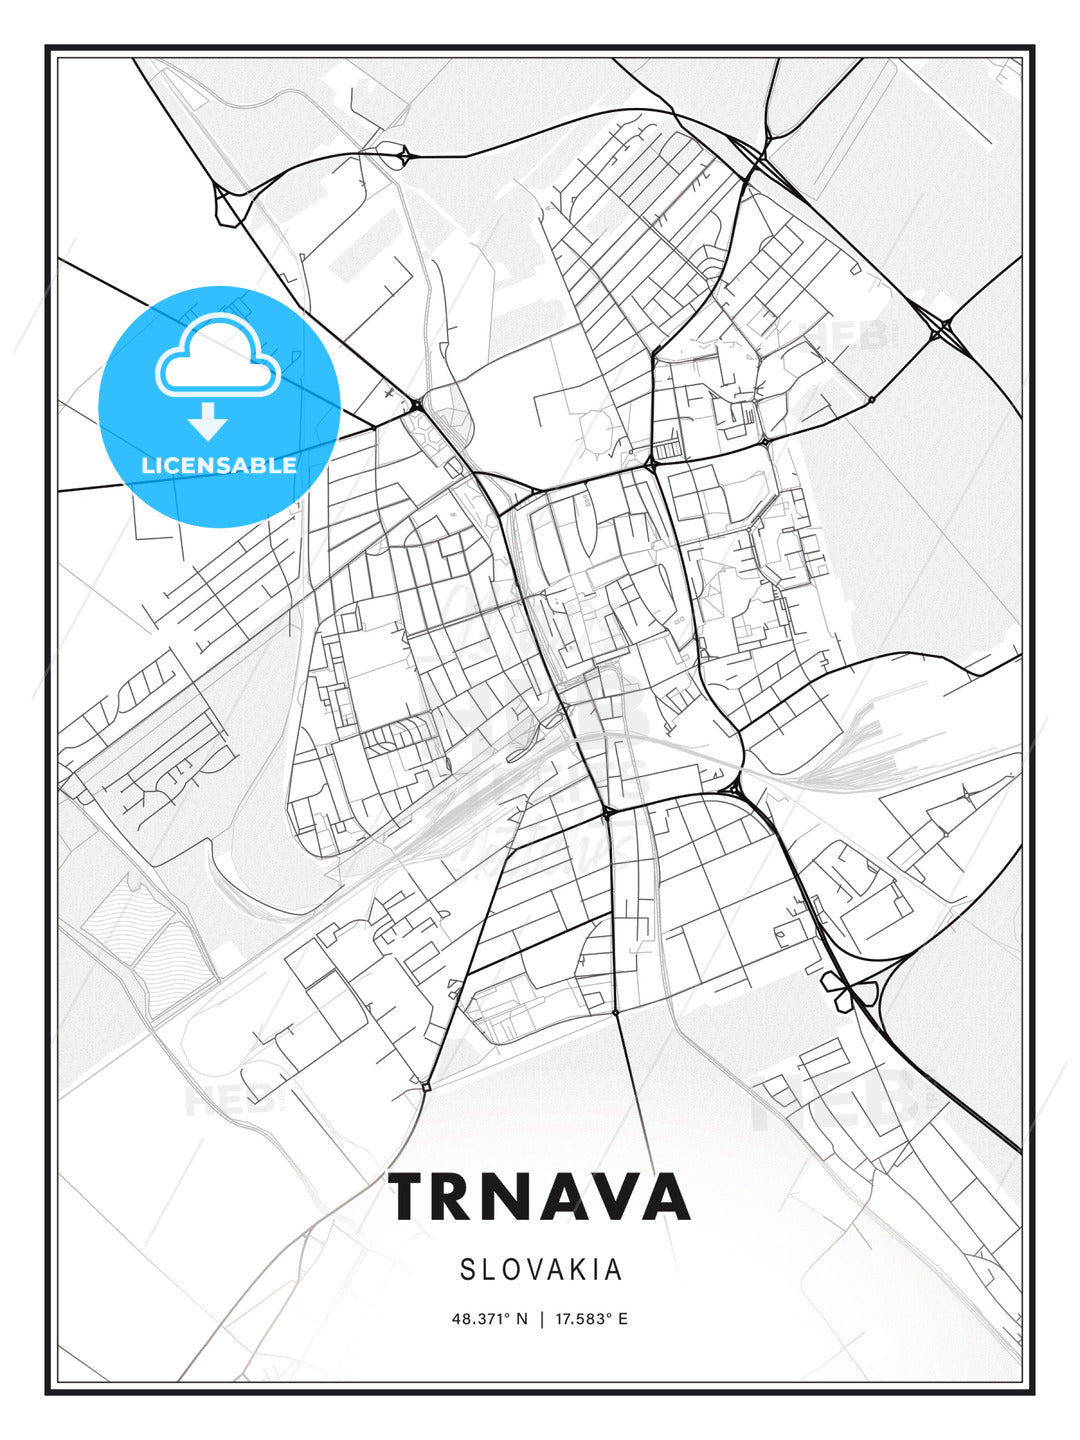 Trnava, Slovakia, Modern Print Template in Various Formats - HEBSTREITS Sketches